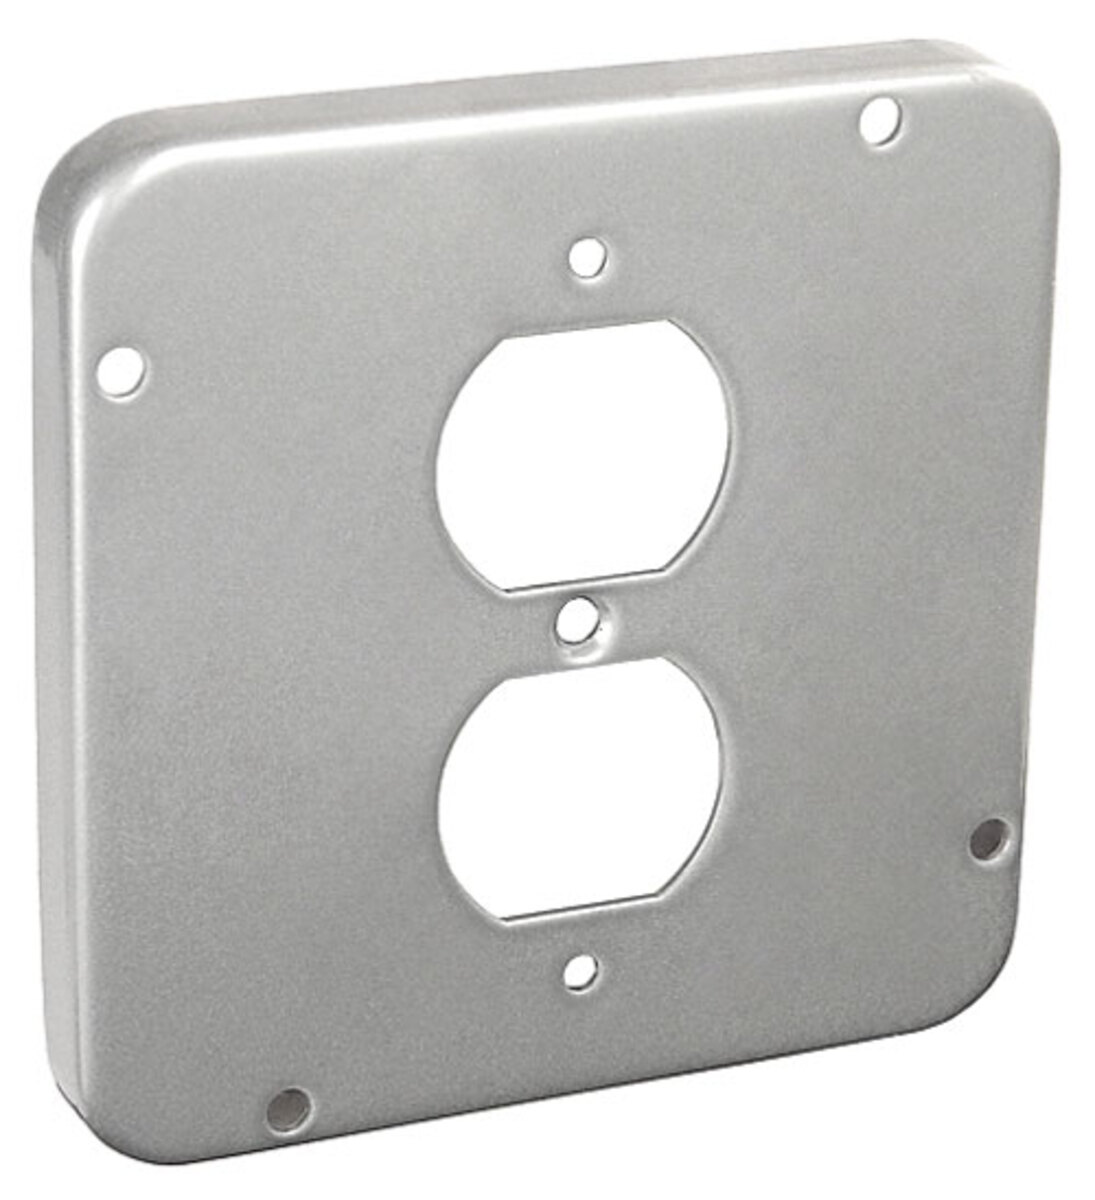 Set of 10 4" Square 1/2" Raised Two Duplex Receptacle Industrial Surface Cover 